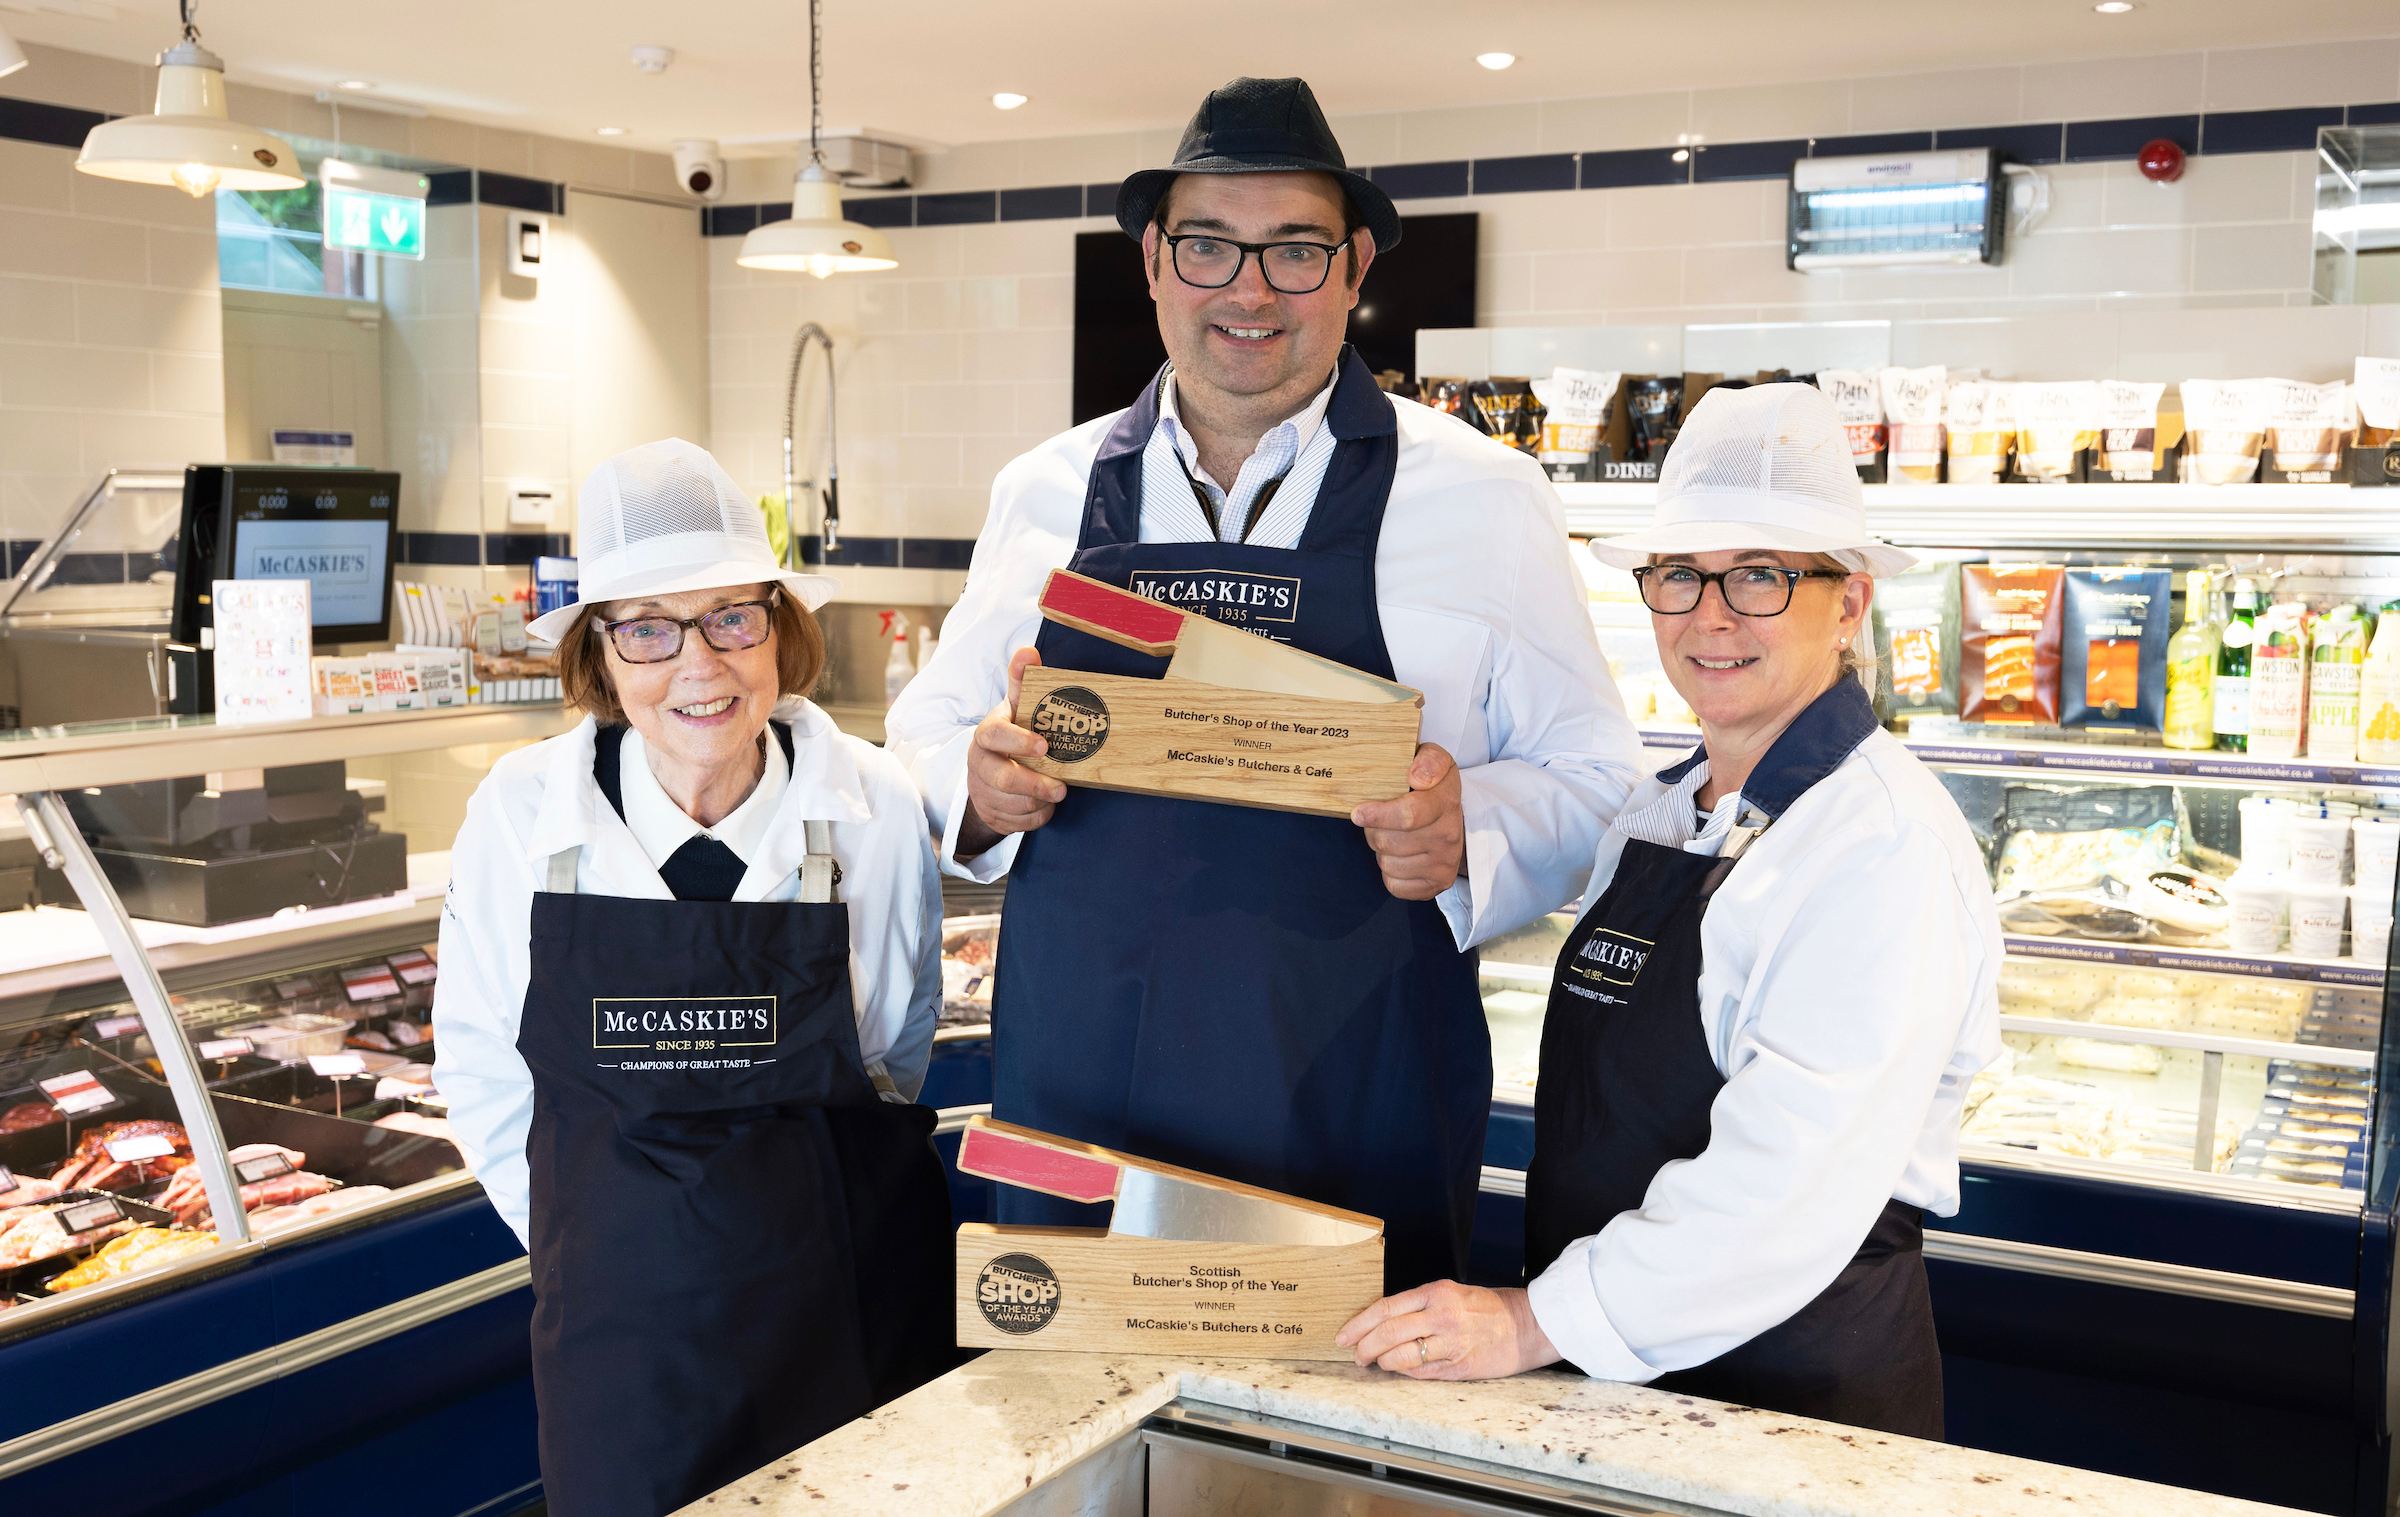 Nigel Ovens of McCaskie's Butchers in Wemyss Bay who has won the UK Butcher's Shop of the Year pictured with his mother Elizabeth and wife Helen. Picture by Graeme Hart.